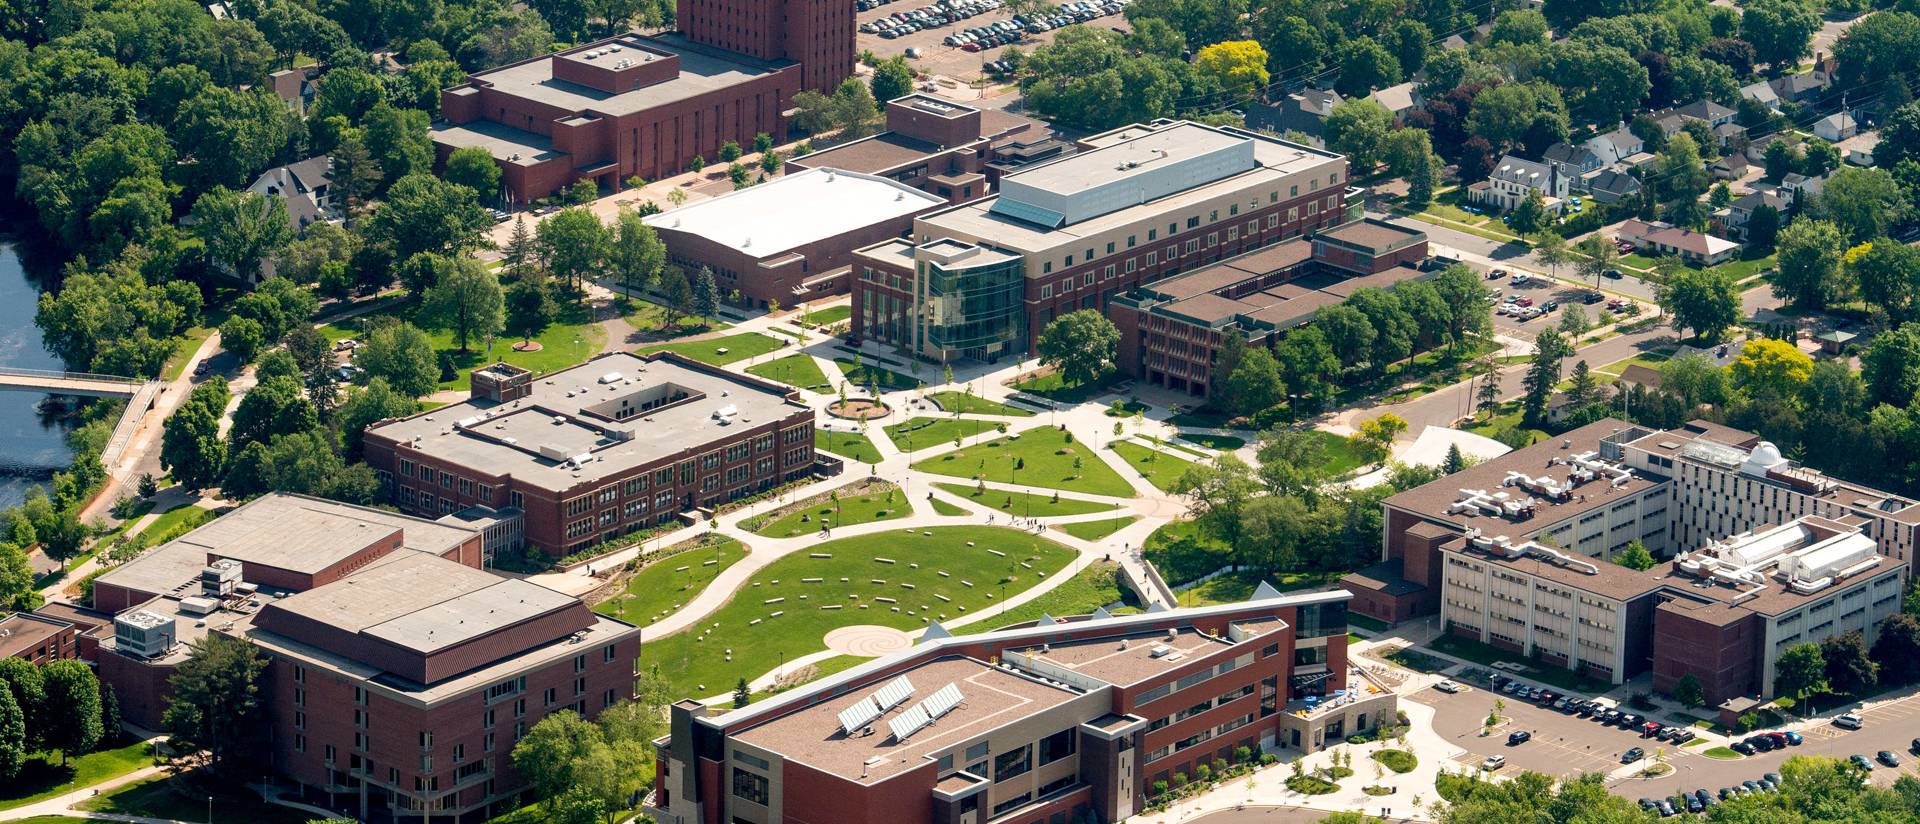 aerial view of UW-Eau Claire central lower campus